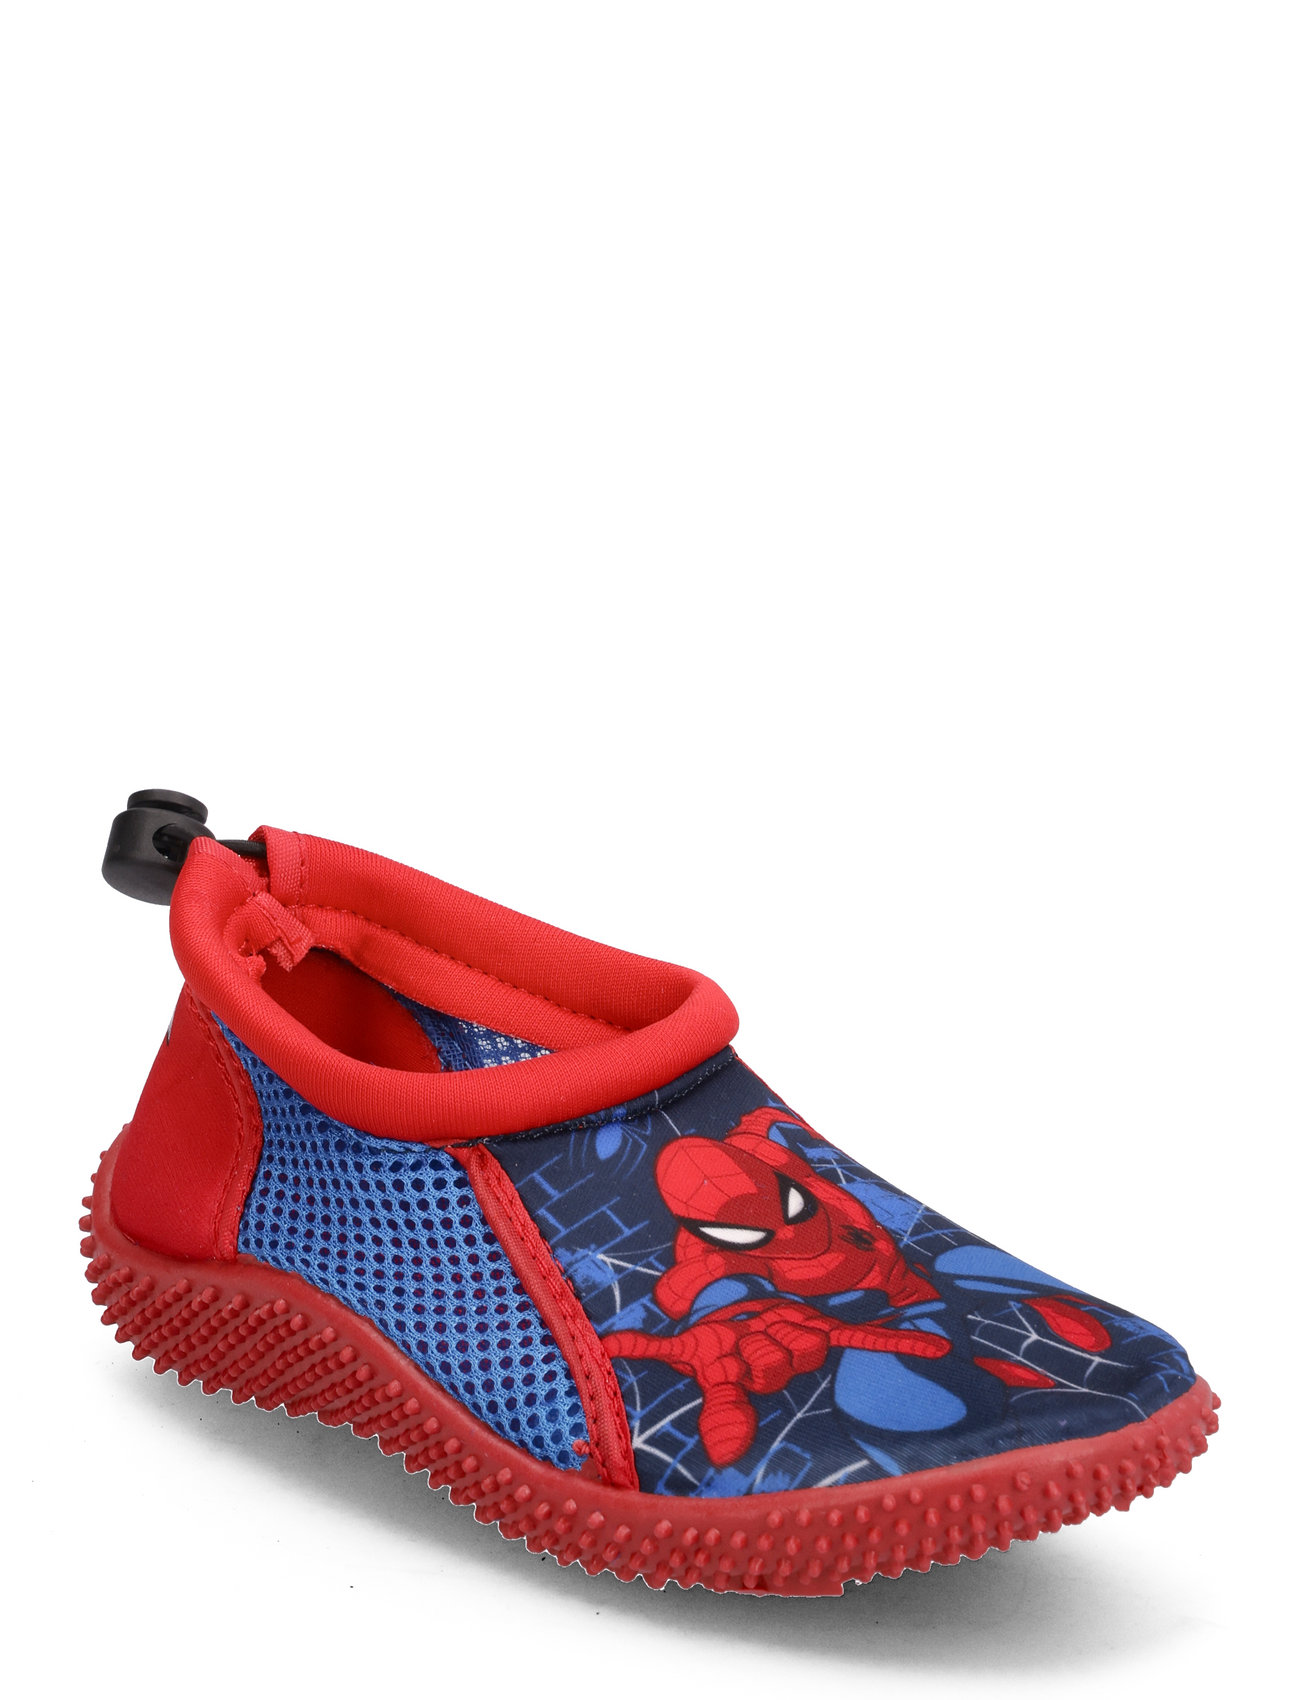 Spiderman Aqua Shoes Shoes Summer Shoes Water Shoes Multi/patterned Spider-man